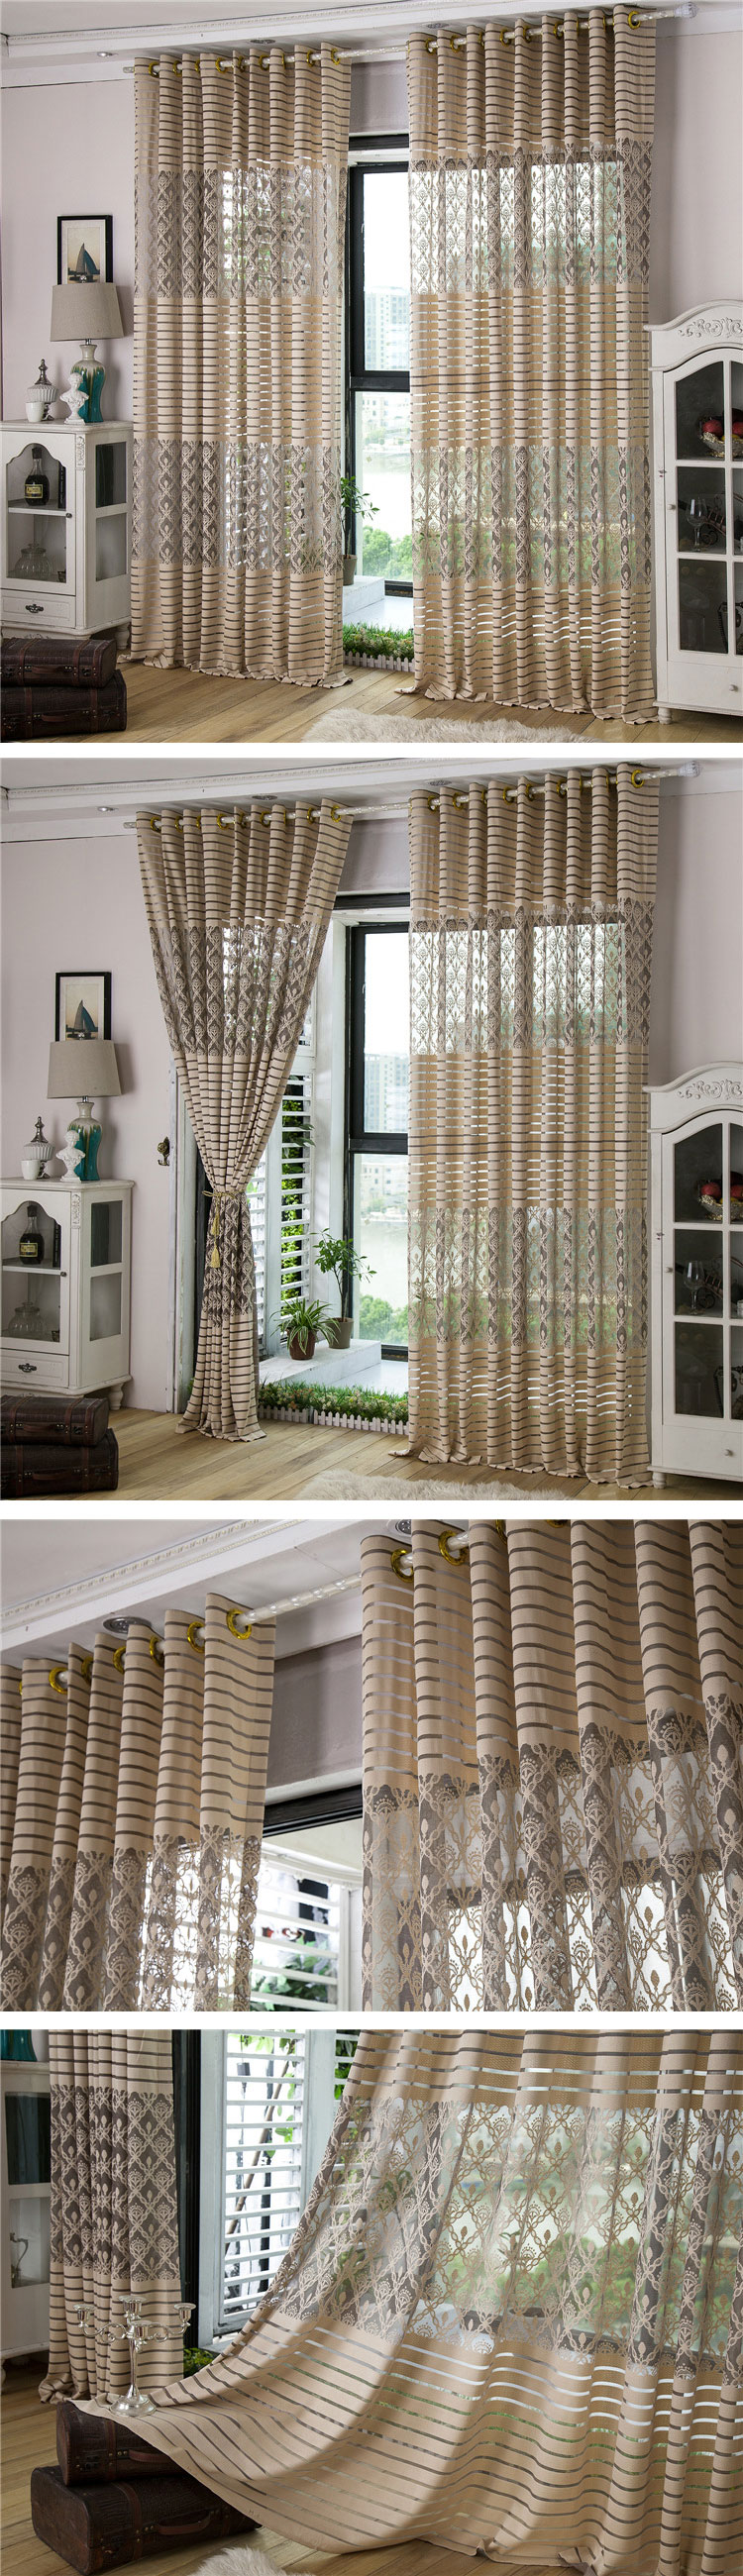 2-Panel-Jacquard-Lace-Sheer-Tulle-Curtains-Bedroom-Living-Room-Hollow-Out-Window-Screening-1059882